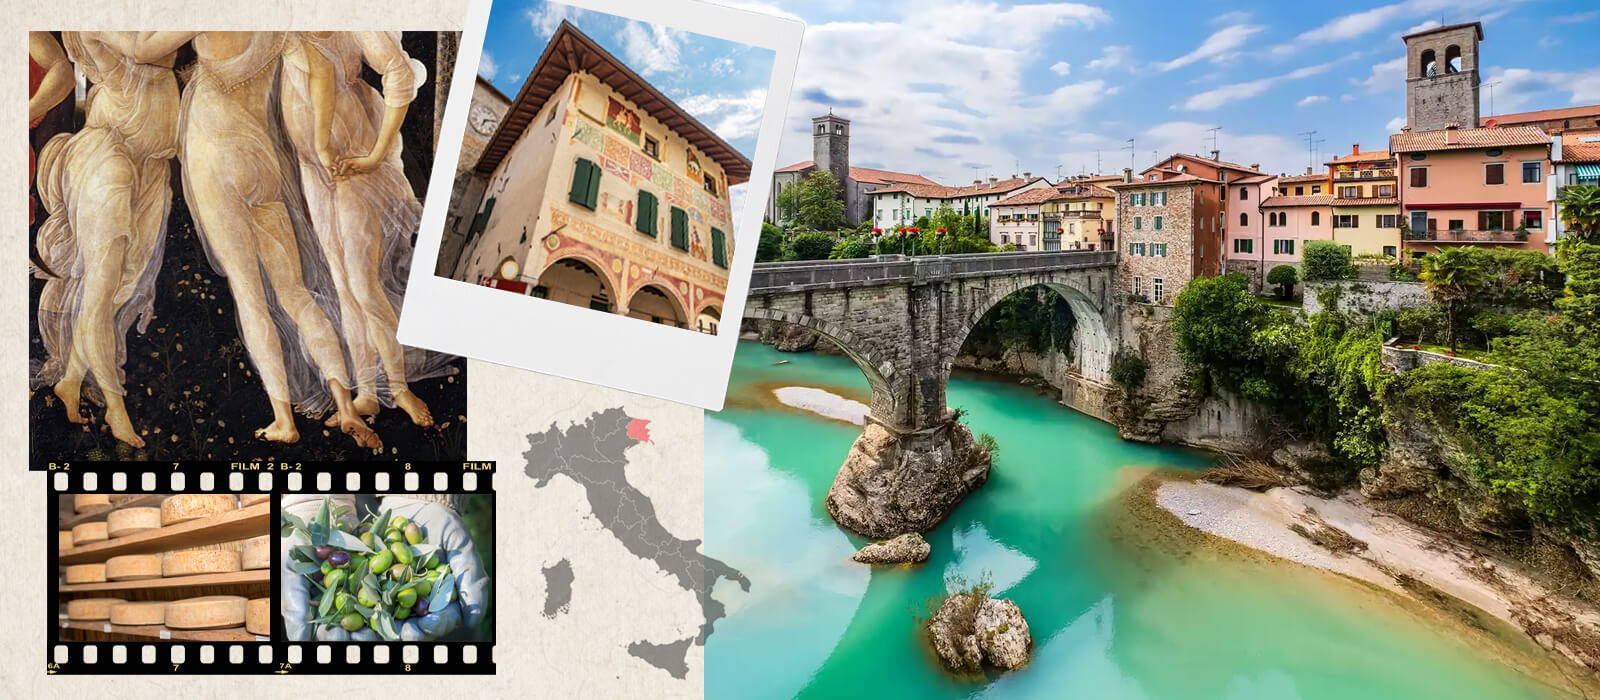 A collage of images from Friuli, Italy.